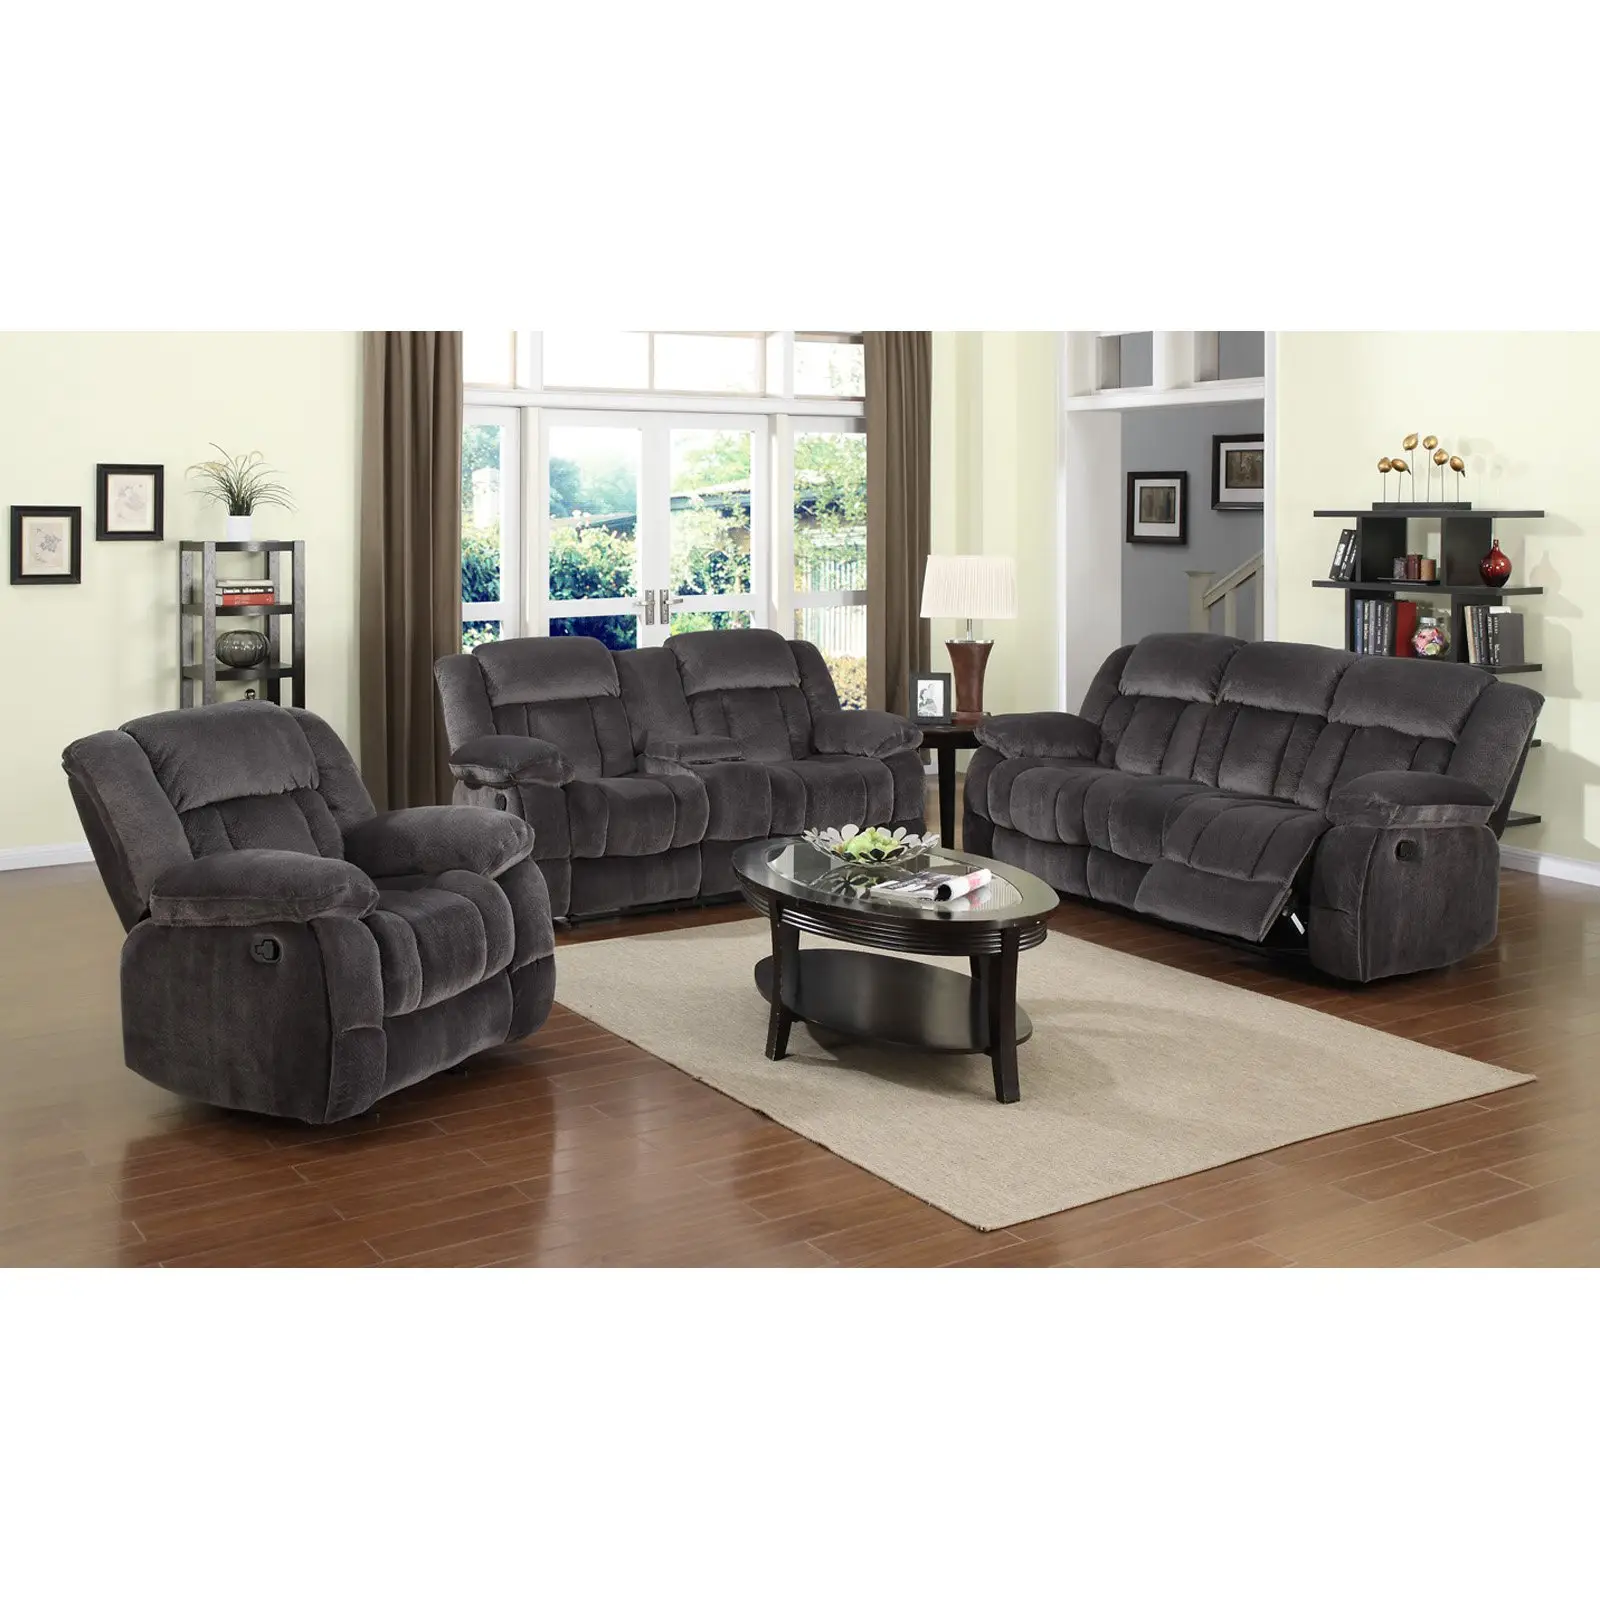 Sans 3 + 2 + 1 Fauteuil Sofa Set Moderne Power Sectional Luxe Sofa Set Voor Woonkamer